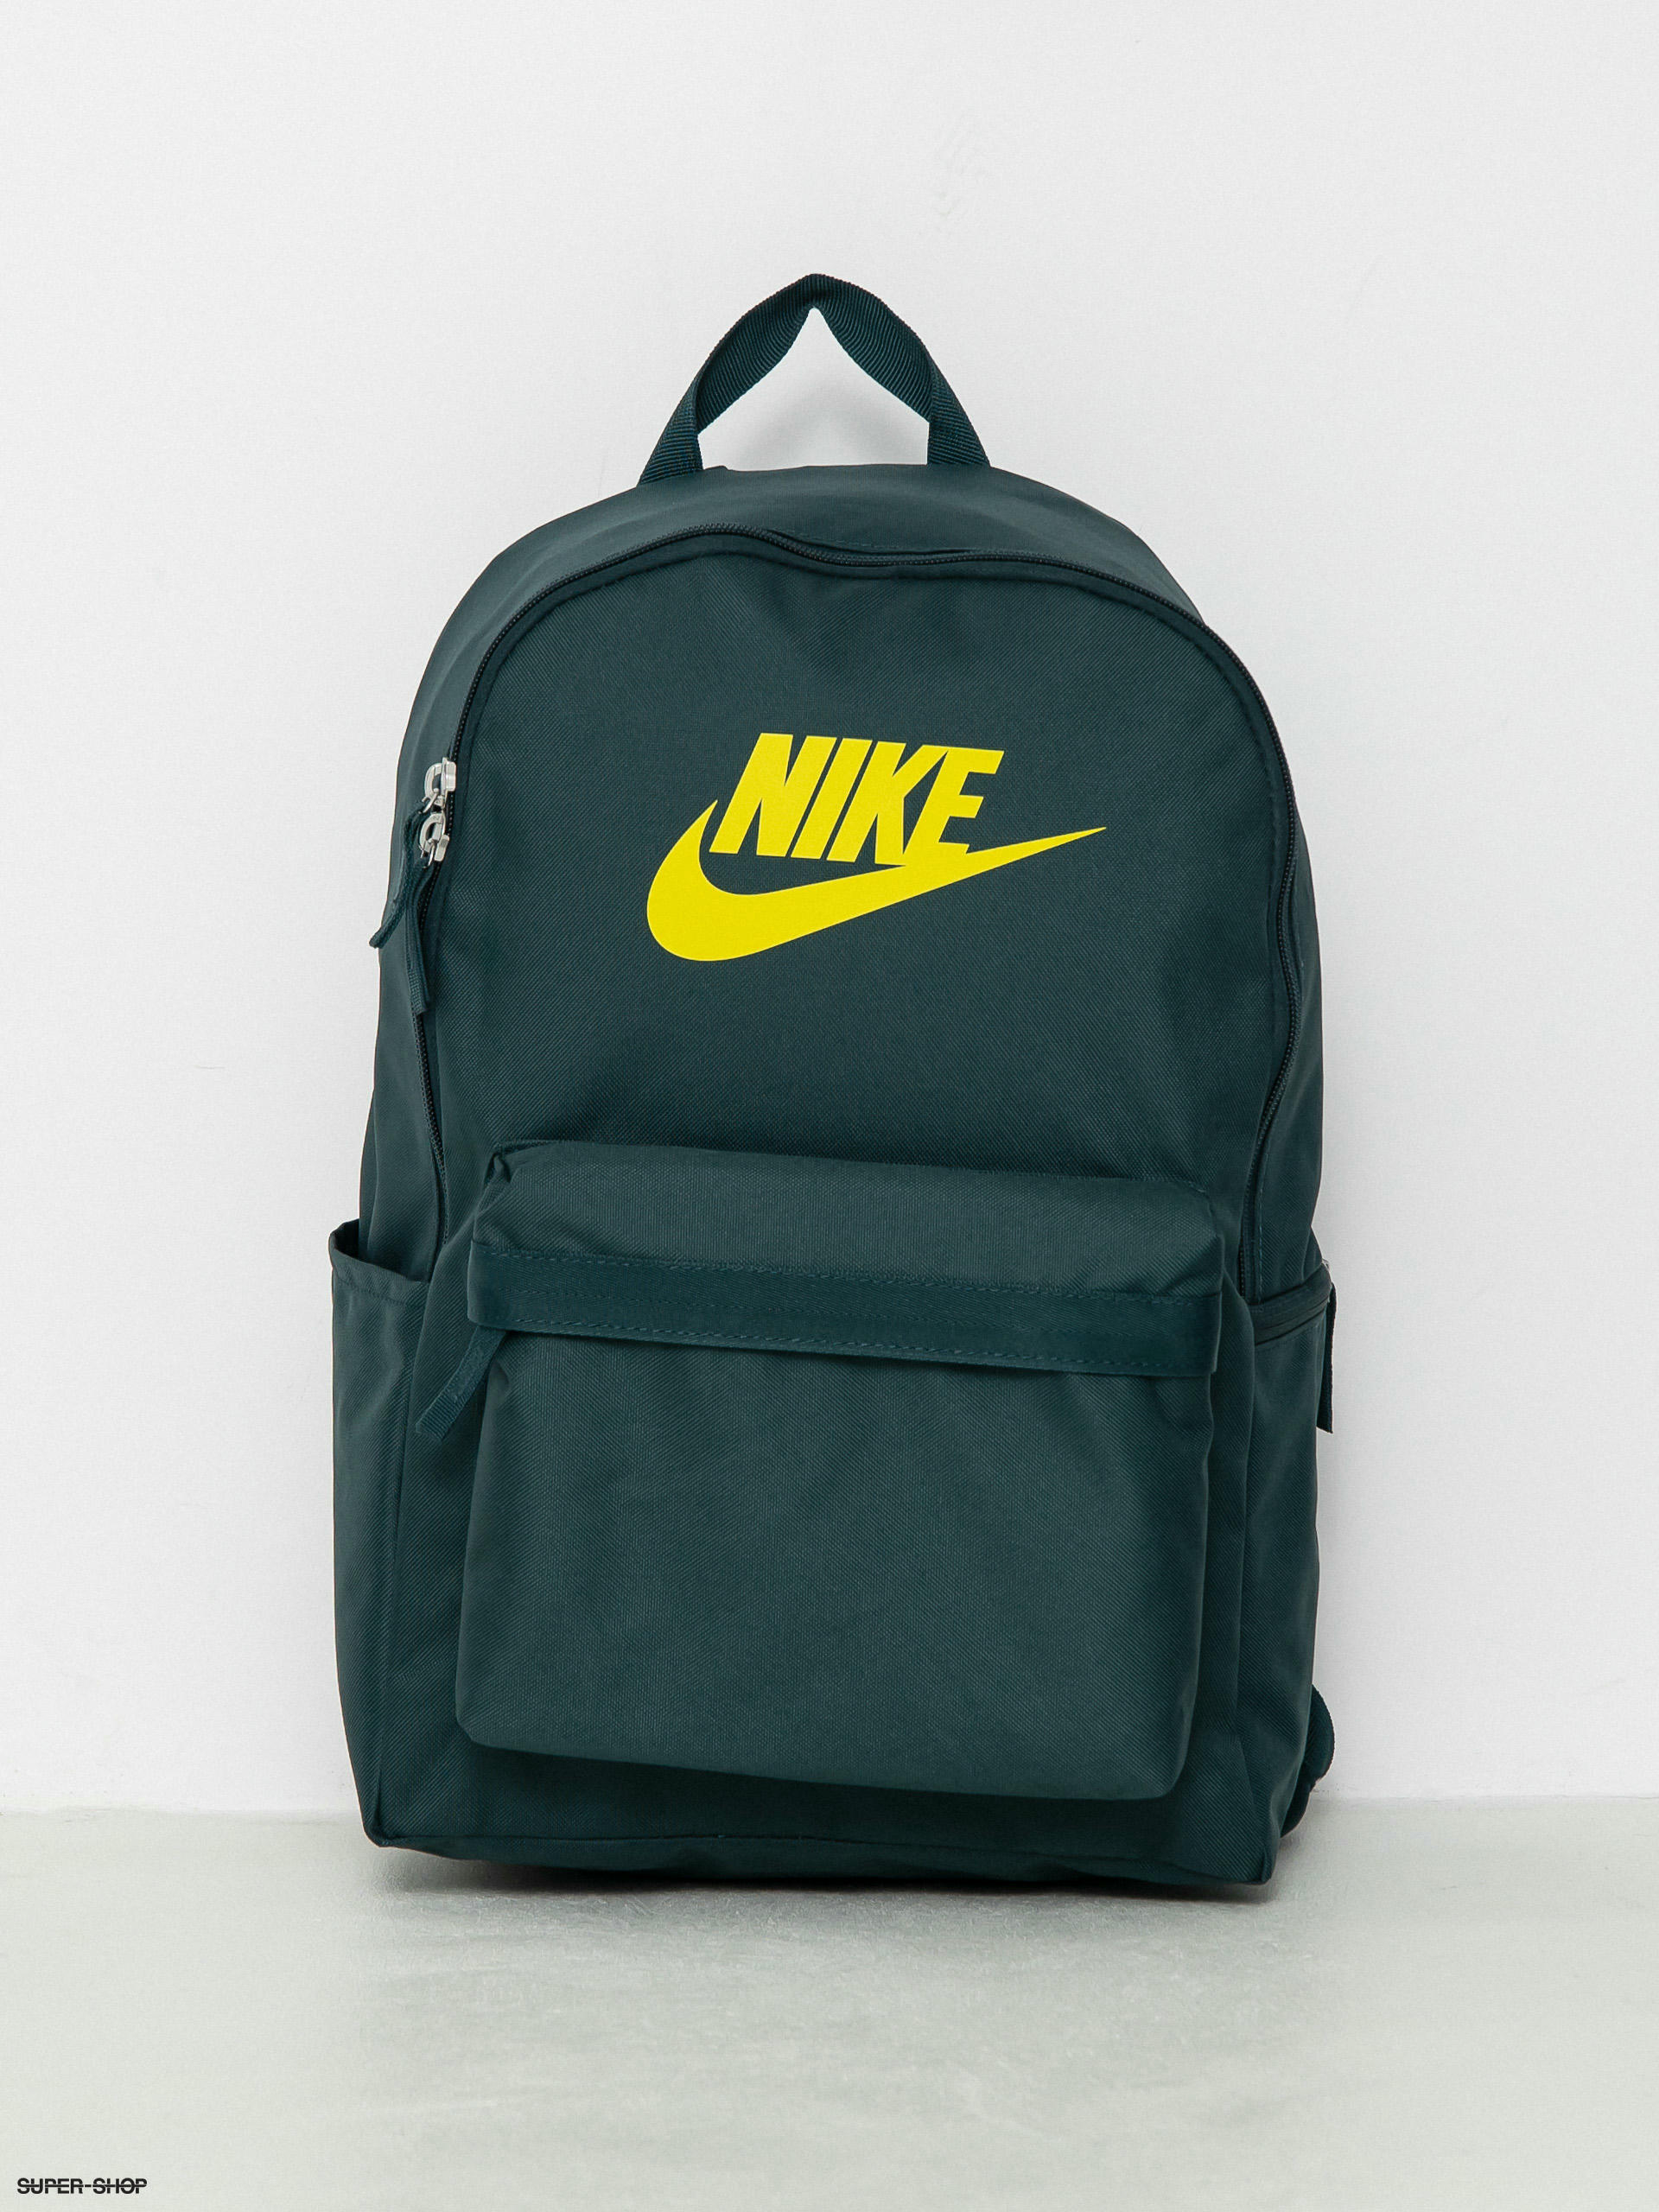 Buy Nike SB RPM Skateboarding Backpack - BA5403, Light Army/Coconut Milk,  One Size at Amazon.in